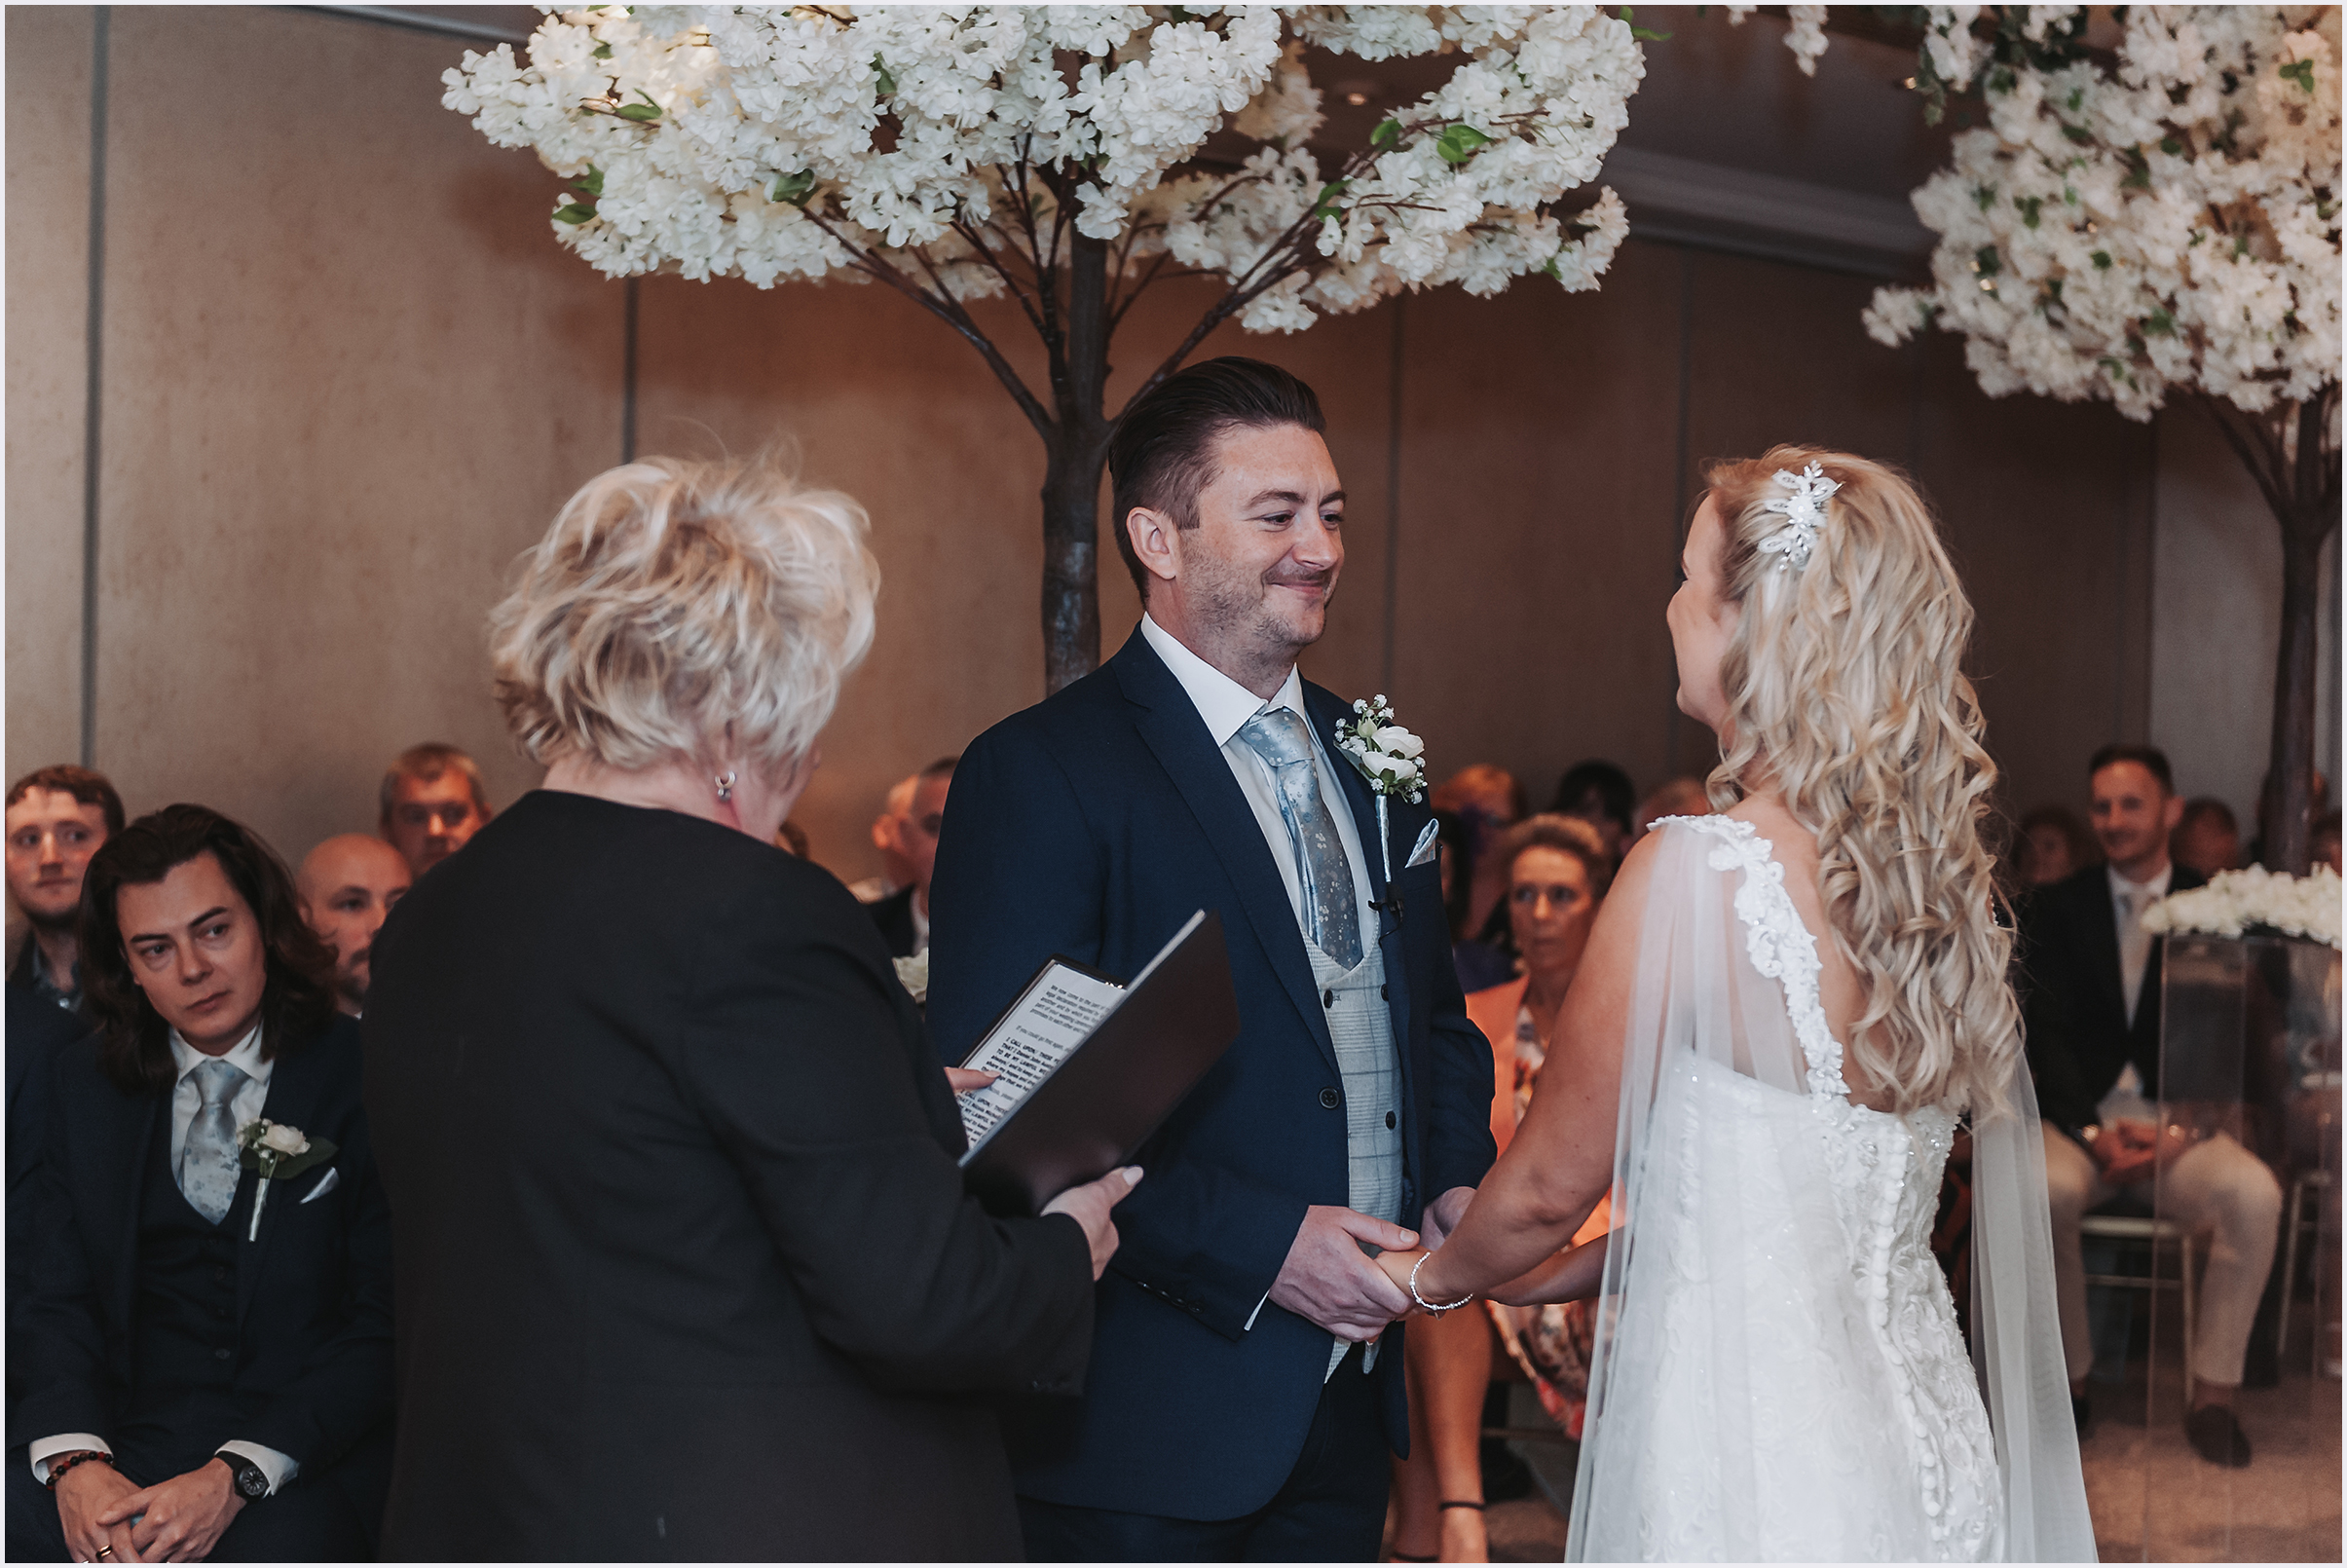 A groom smiling and his beautiful bride and they exchange vows during their wedding ceremony at The Grosvenor Pulford Hotel and Spa